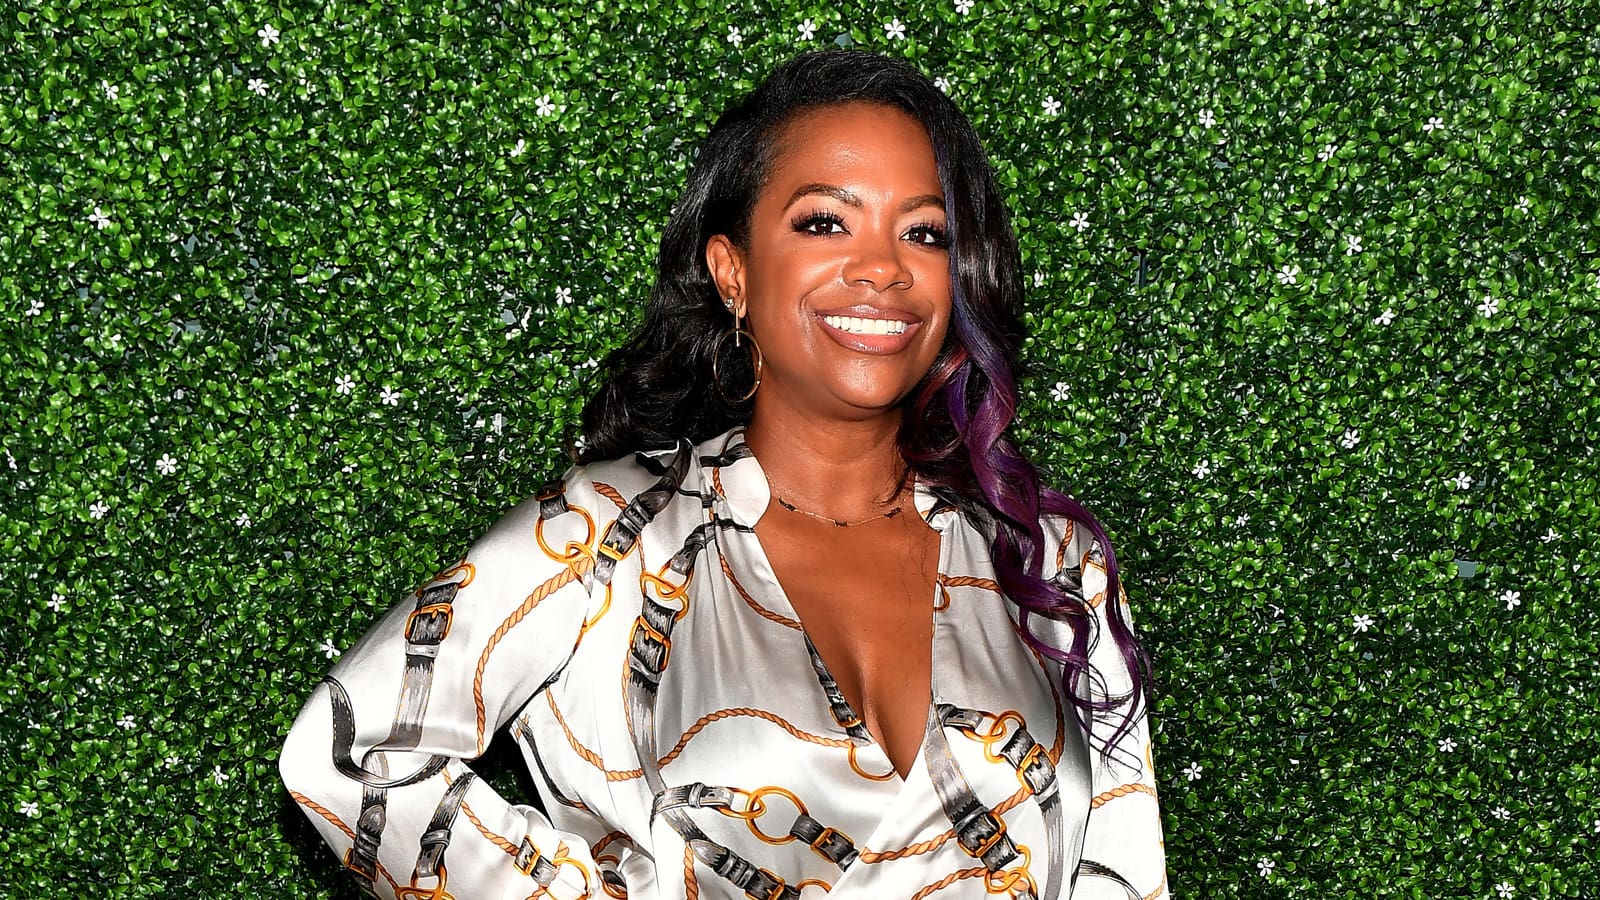 kandi-burruss-congratulates-andre-dickens-for-his-win-see-her-video